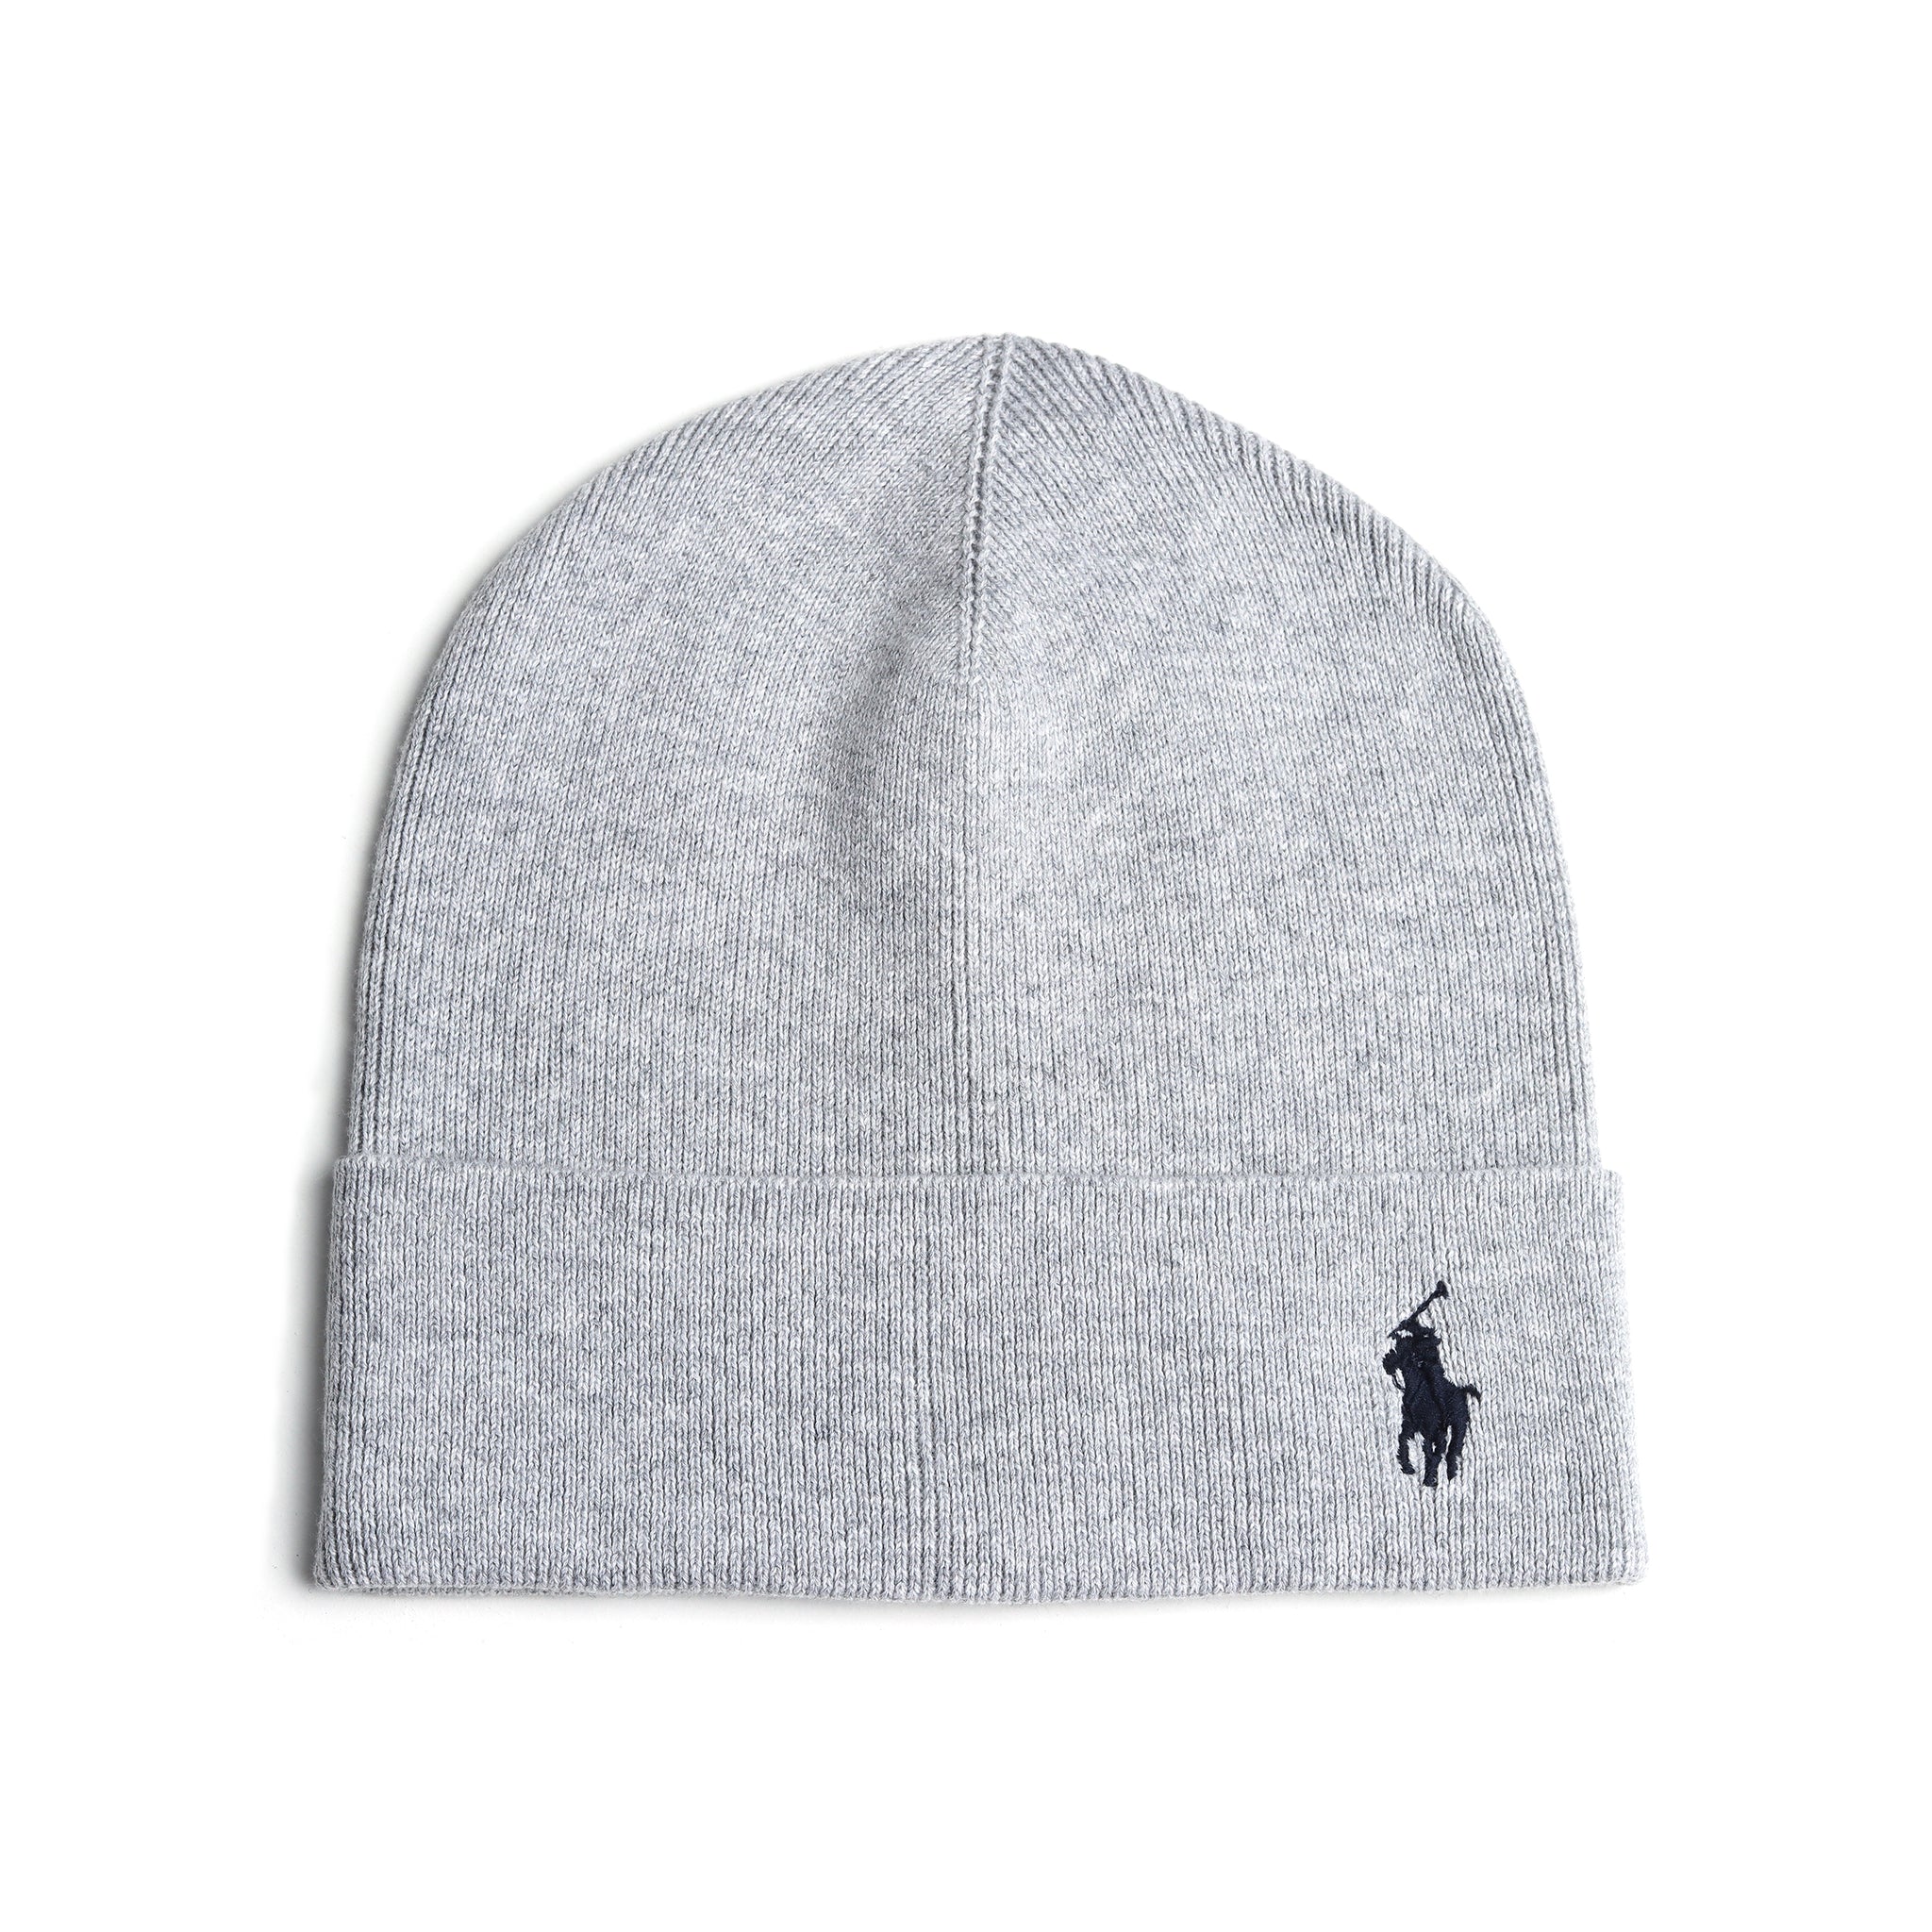 polo-ralph-lauren-ribbed-cotton-hat-449891263-andover-heather-003